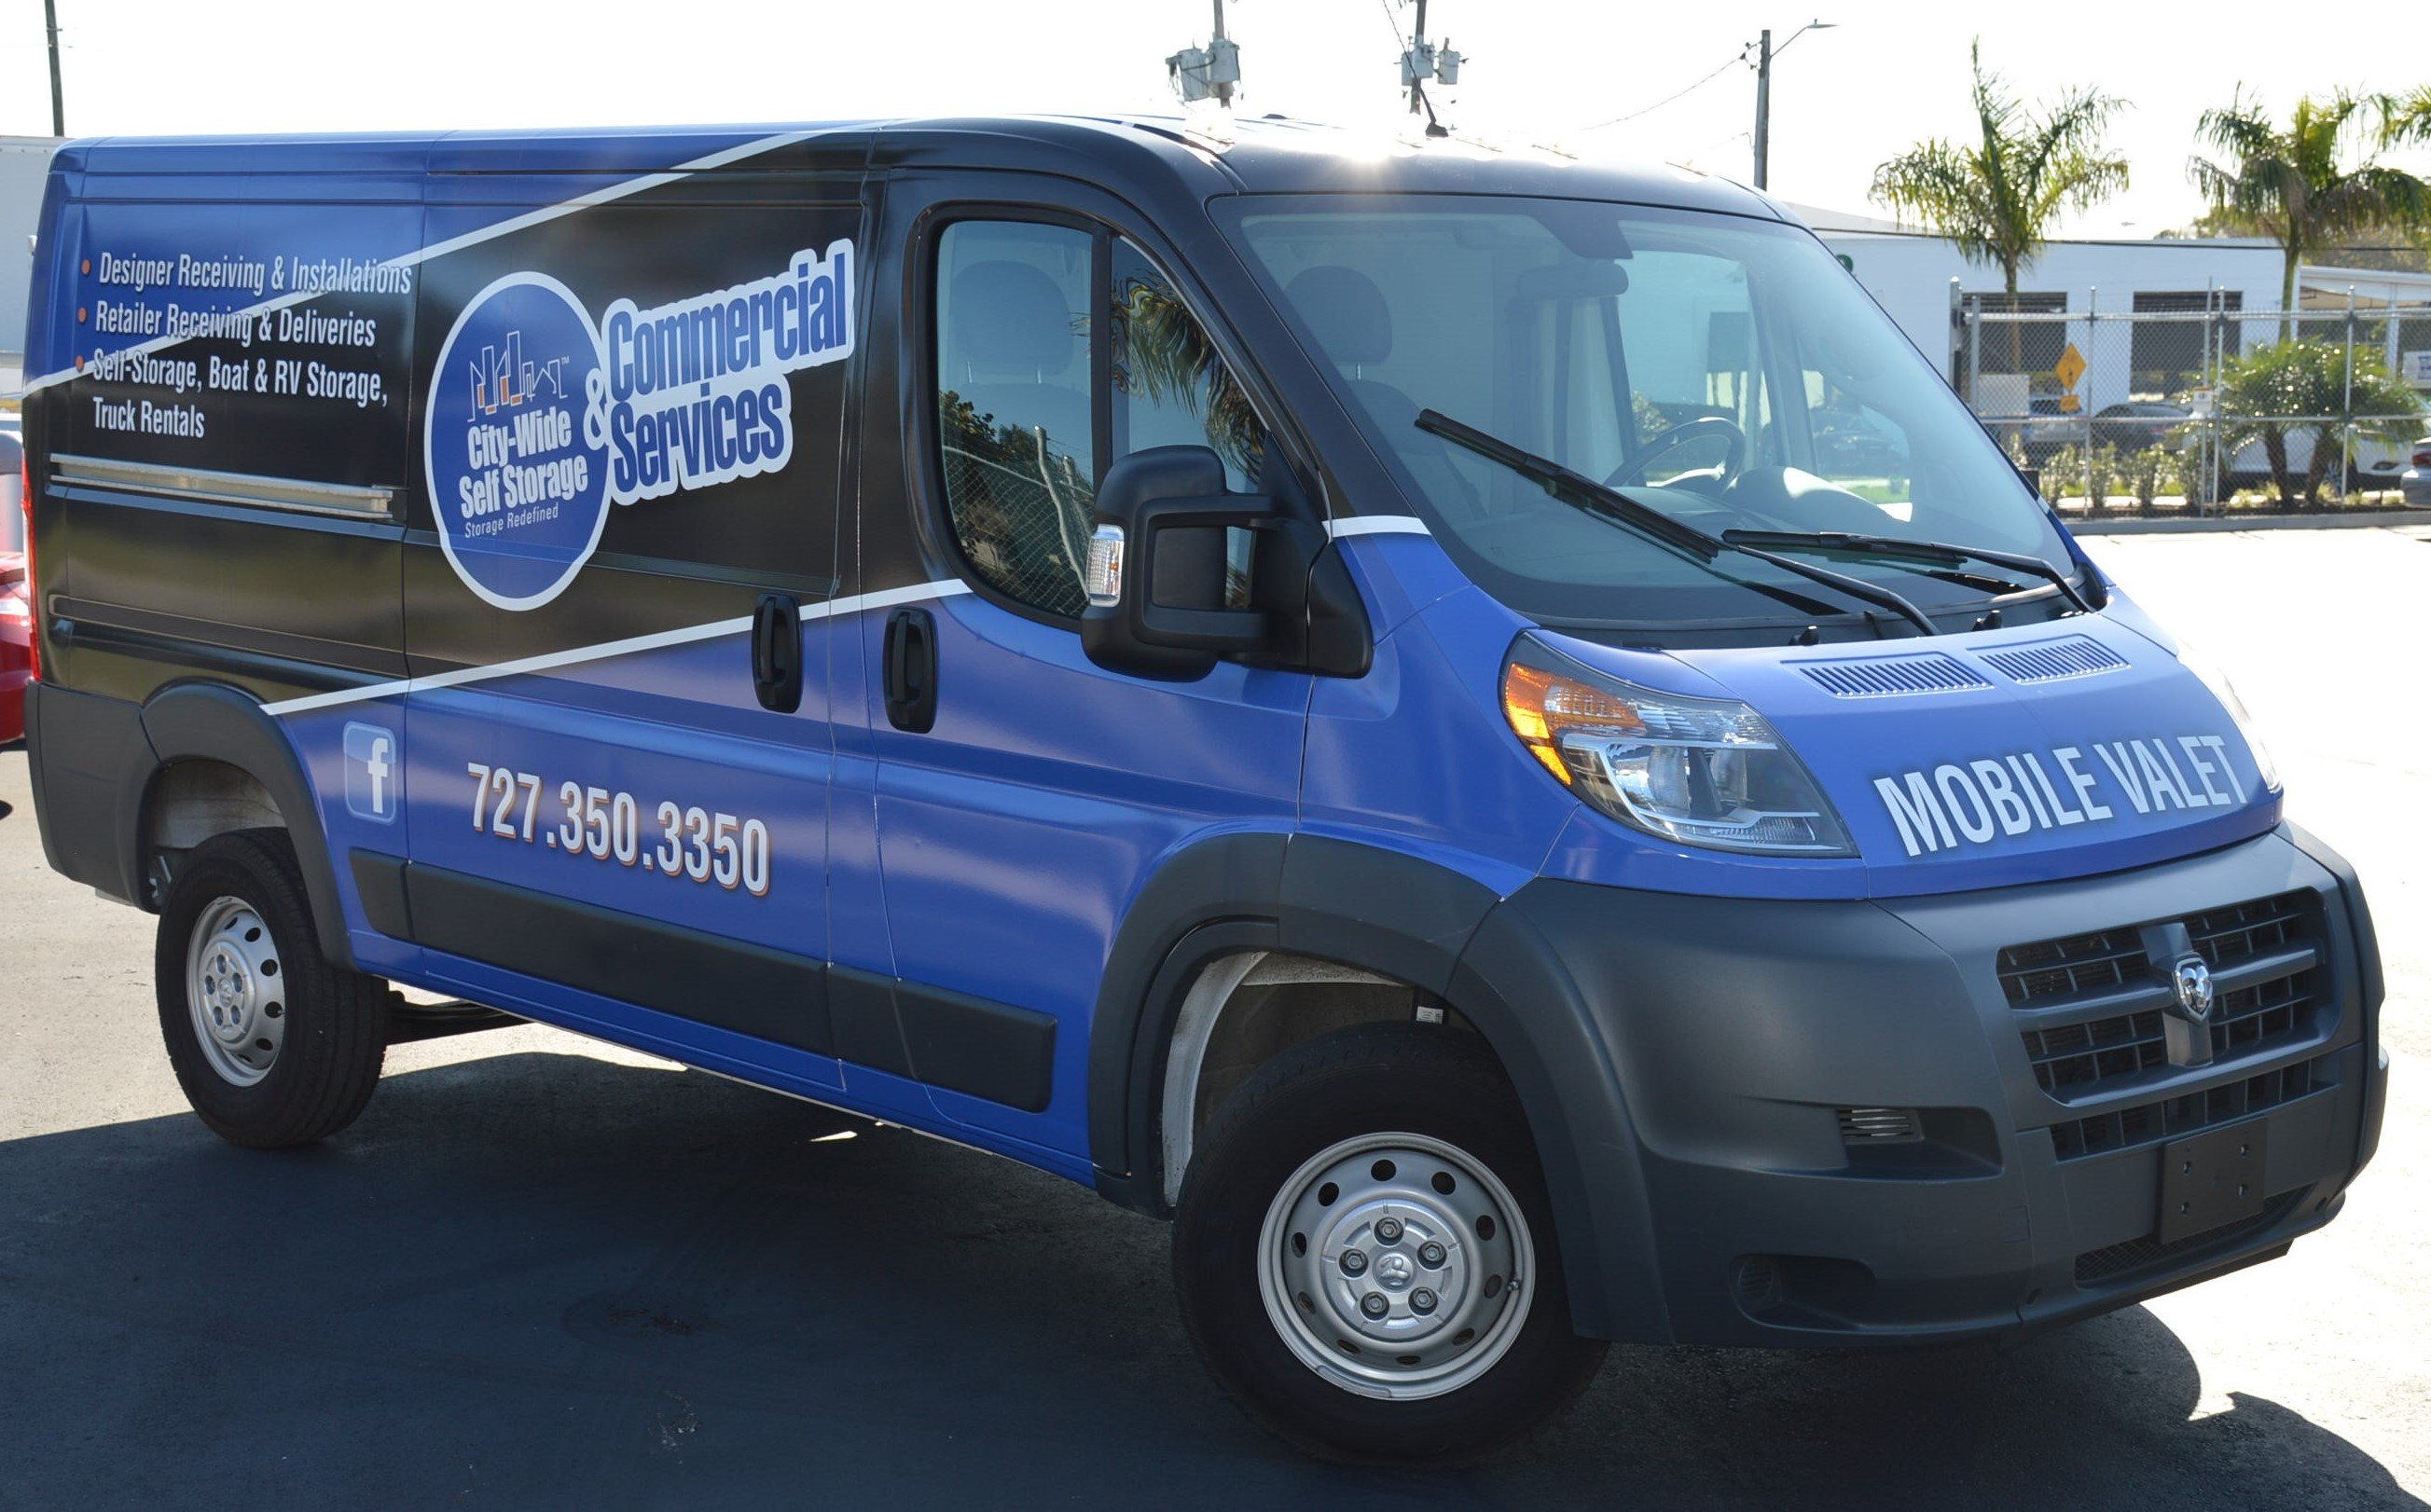 City-Wide Commercial Services’ Mobile Valet provides on-demand inventory delivery to local retailers around the Tampa Bay area.